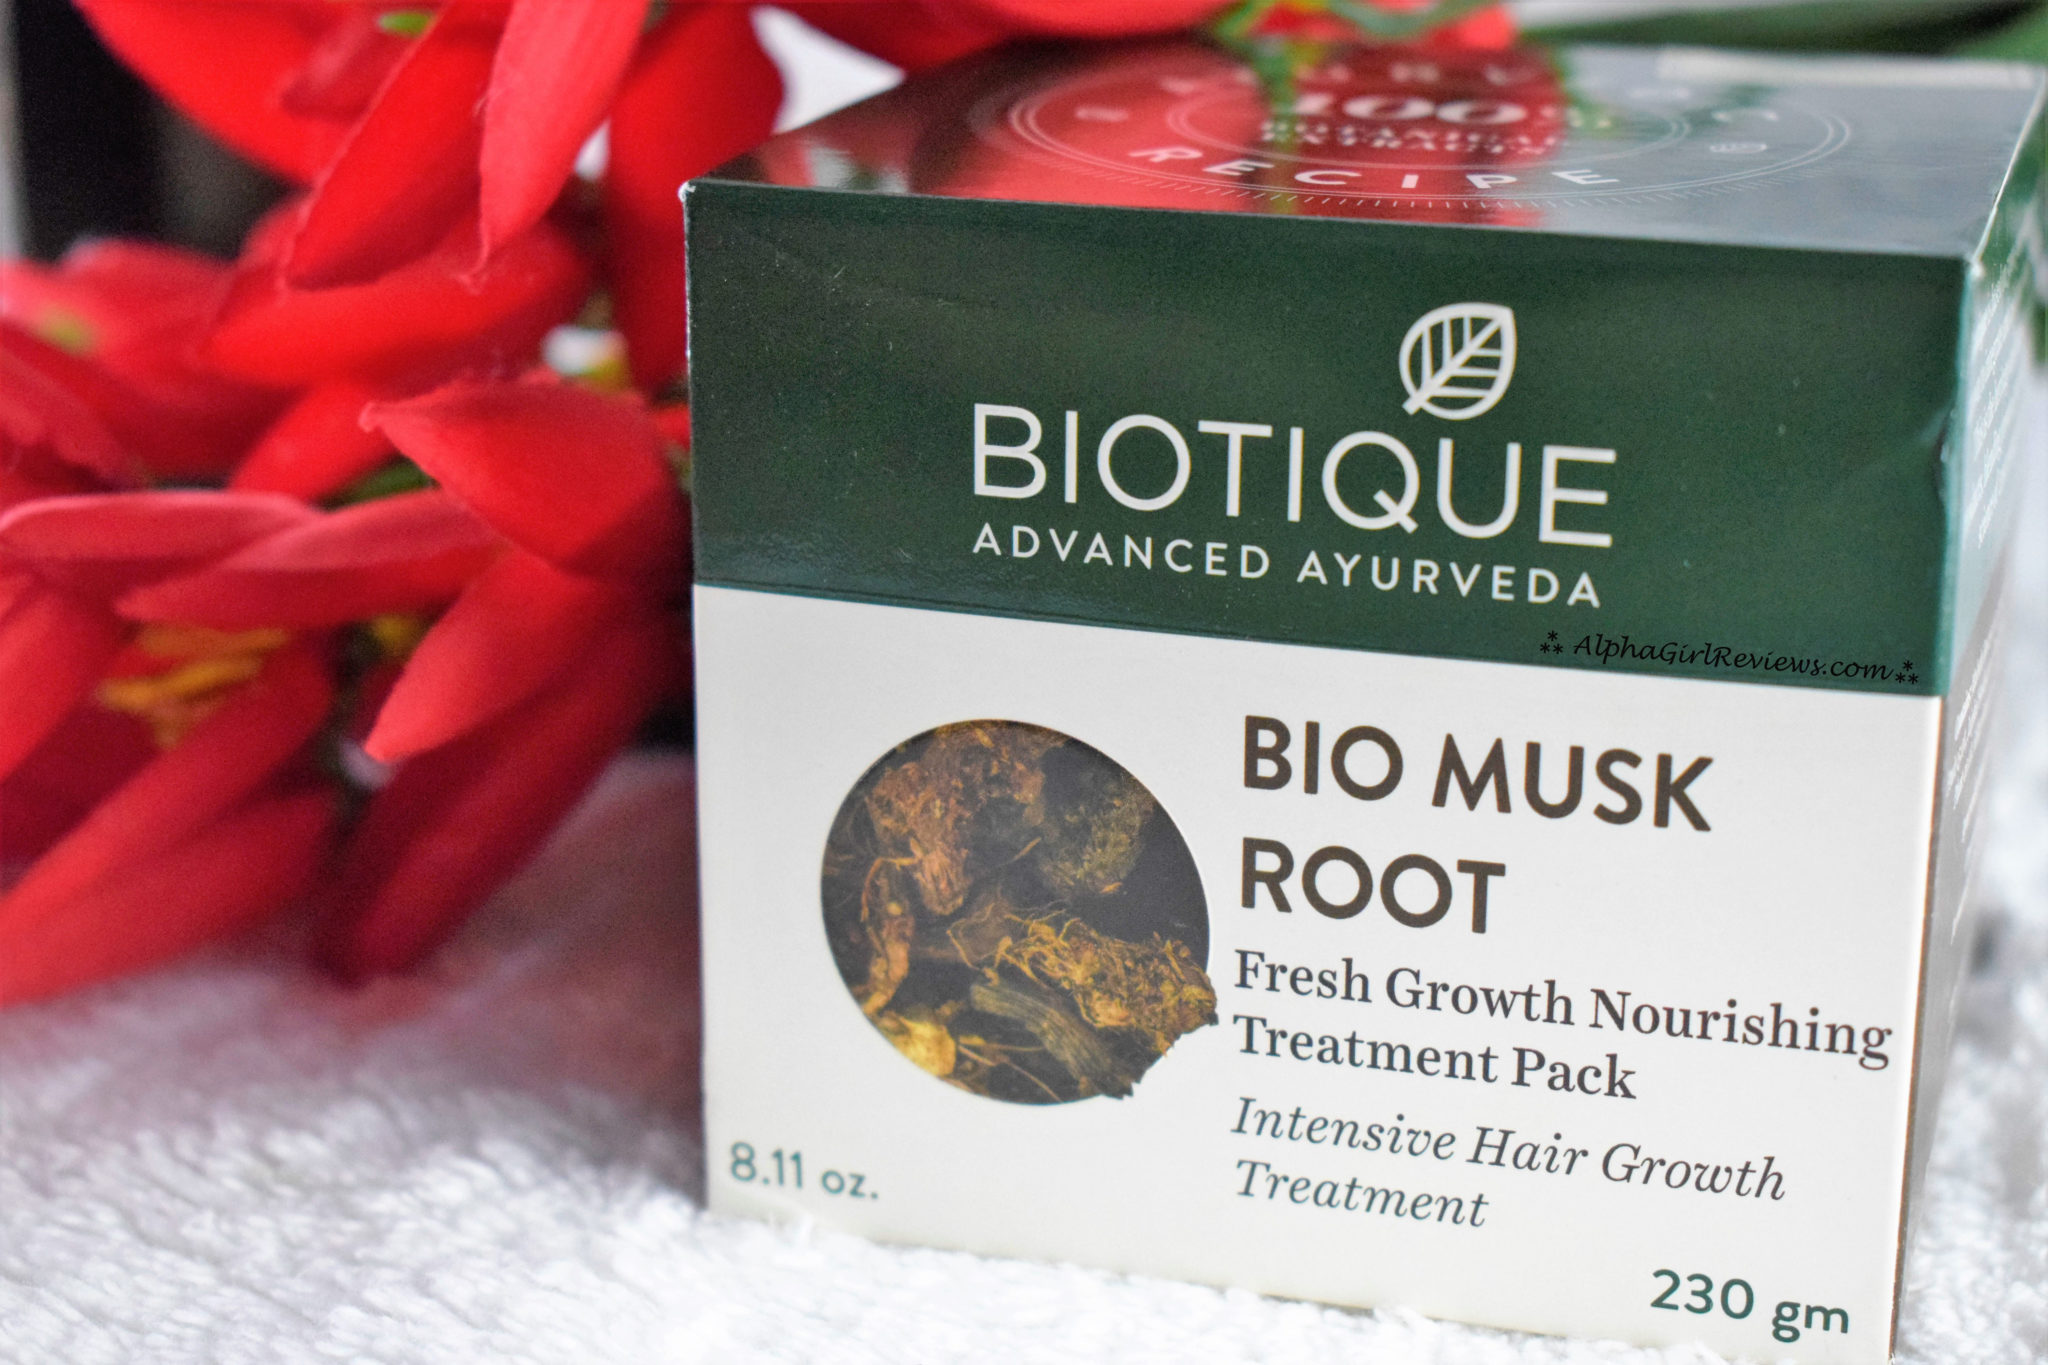 Biotique Bio Musk Root Hair Mask Review: Makes The Hair Soft, Dark And  Shiny | AlphaGirl Reviews